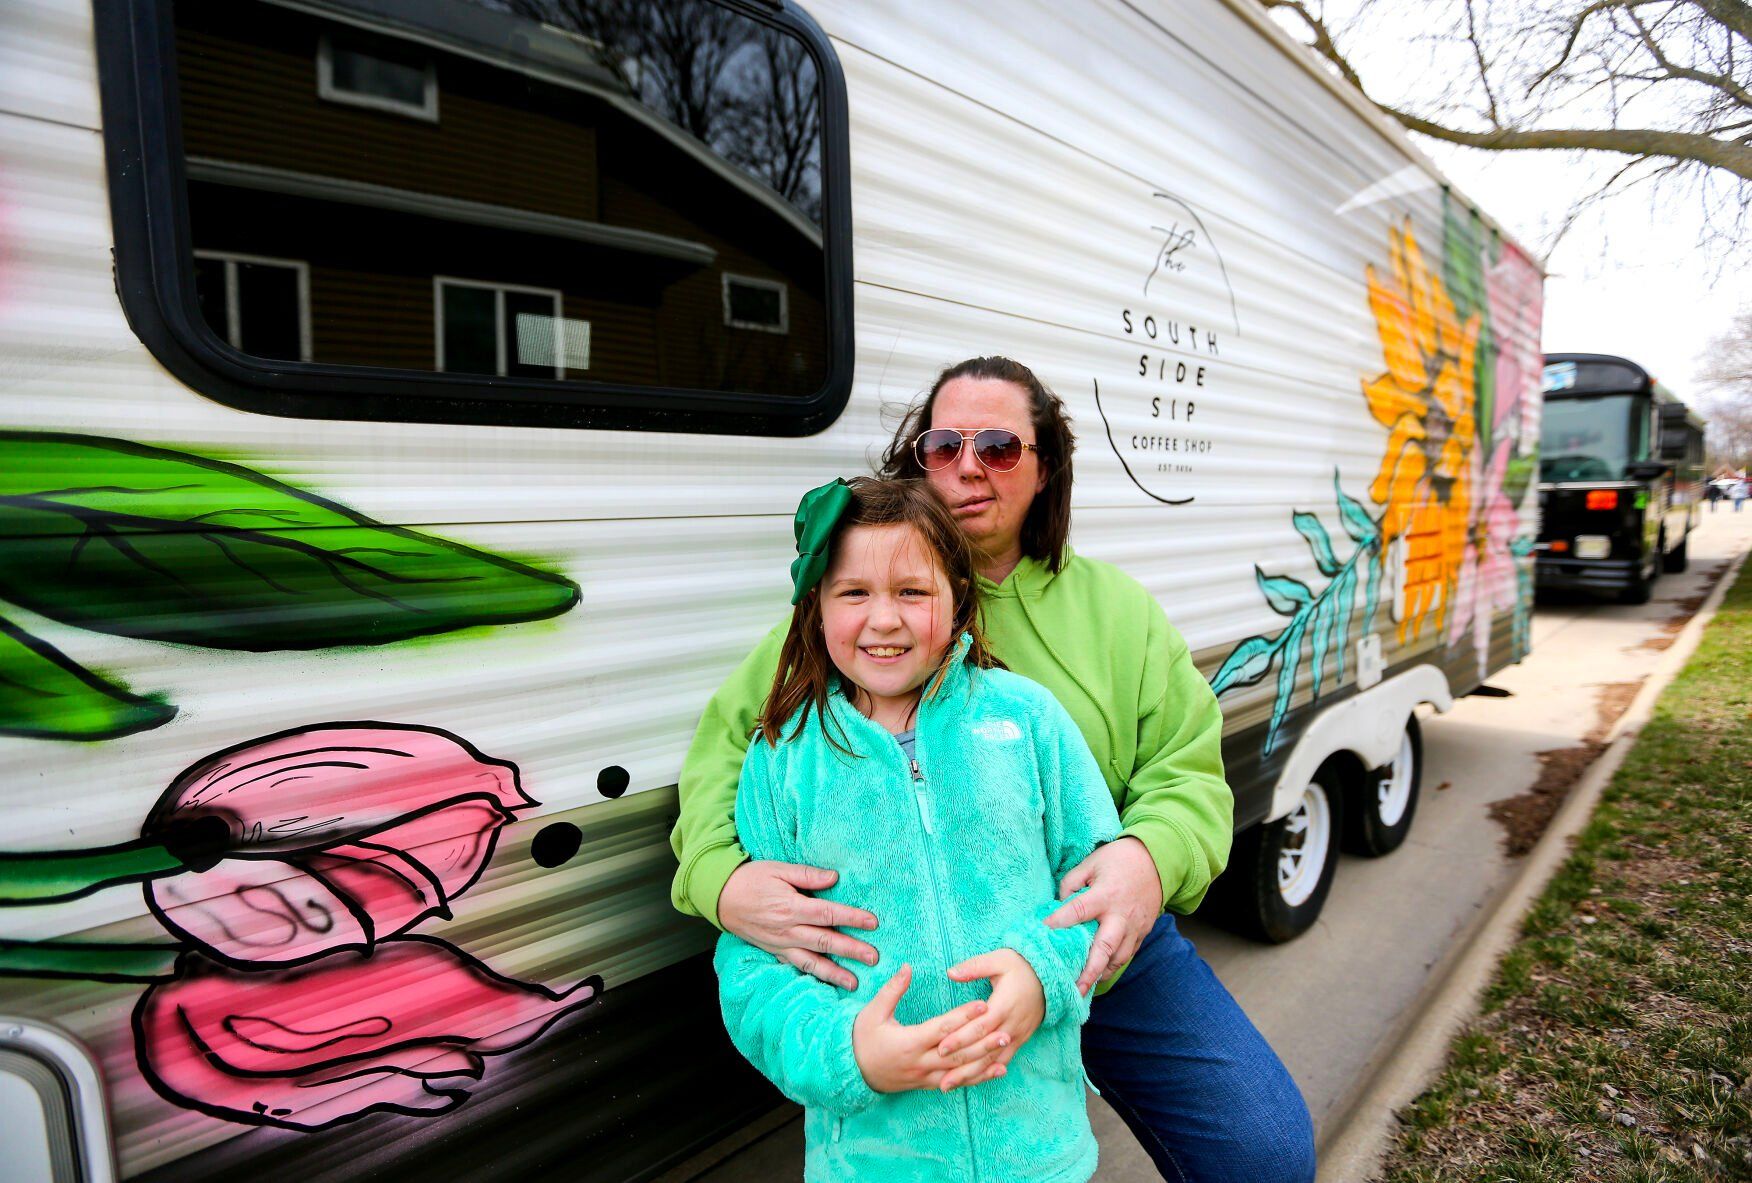 The South Side Sip owner Heather Vonderhaar is seen with her daughter, Elise Boge, in front of the business while it is parked in Dyersville, Iowa. The mobile coffee trailer serves northeast Iowa.    PHOTO CREDIT: Dave Kettering